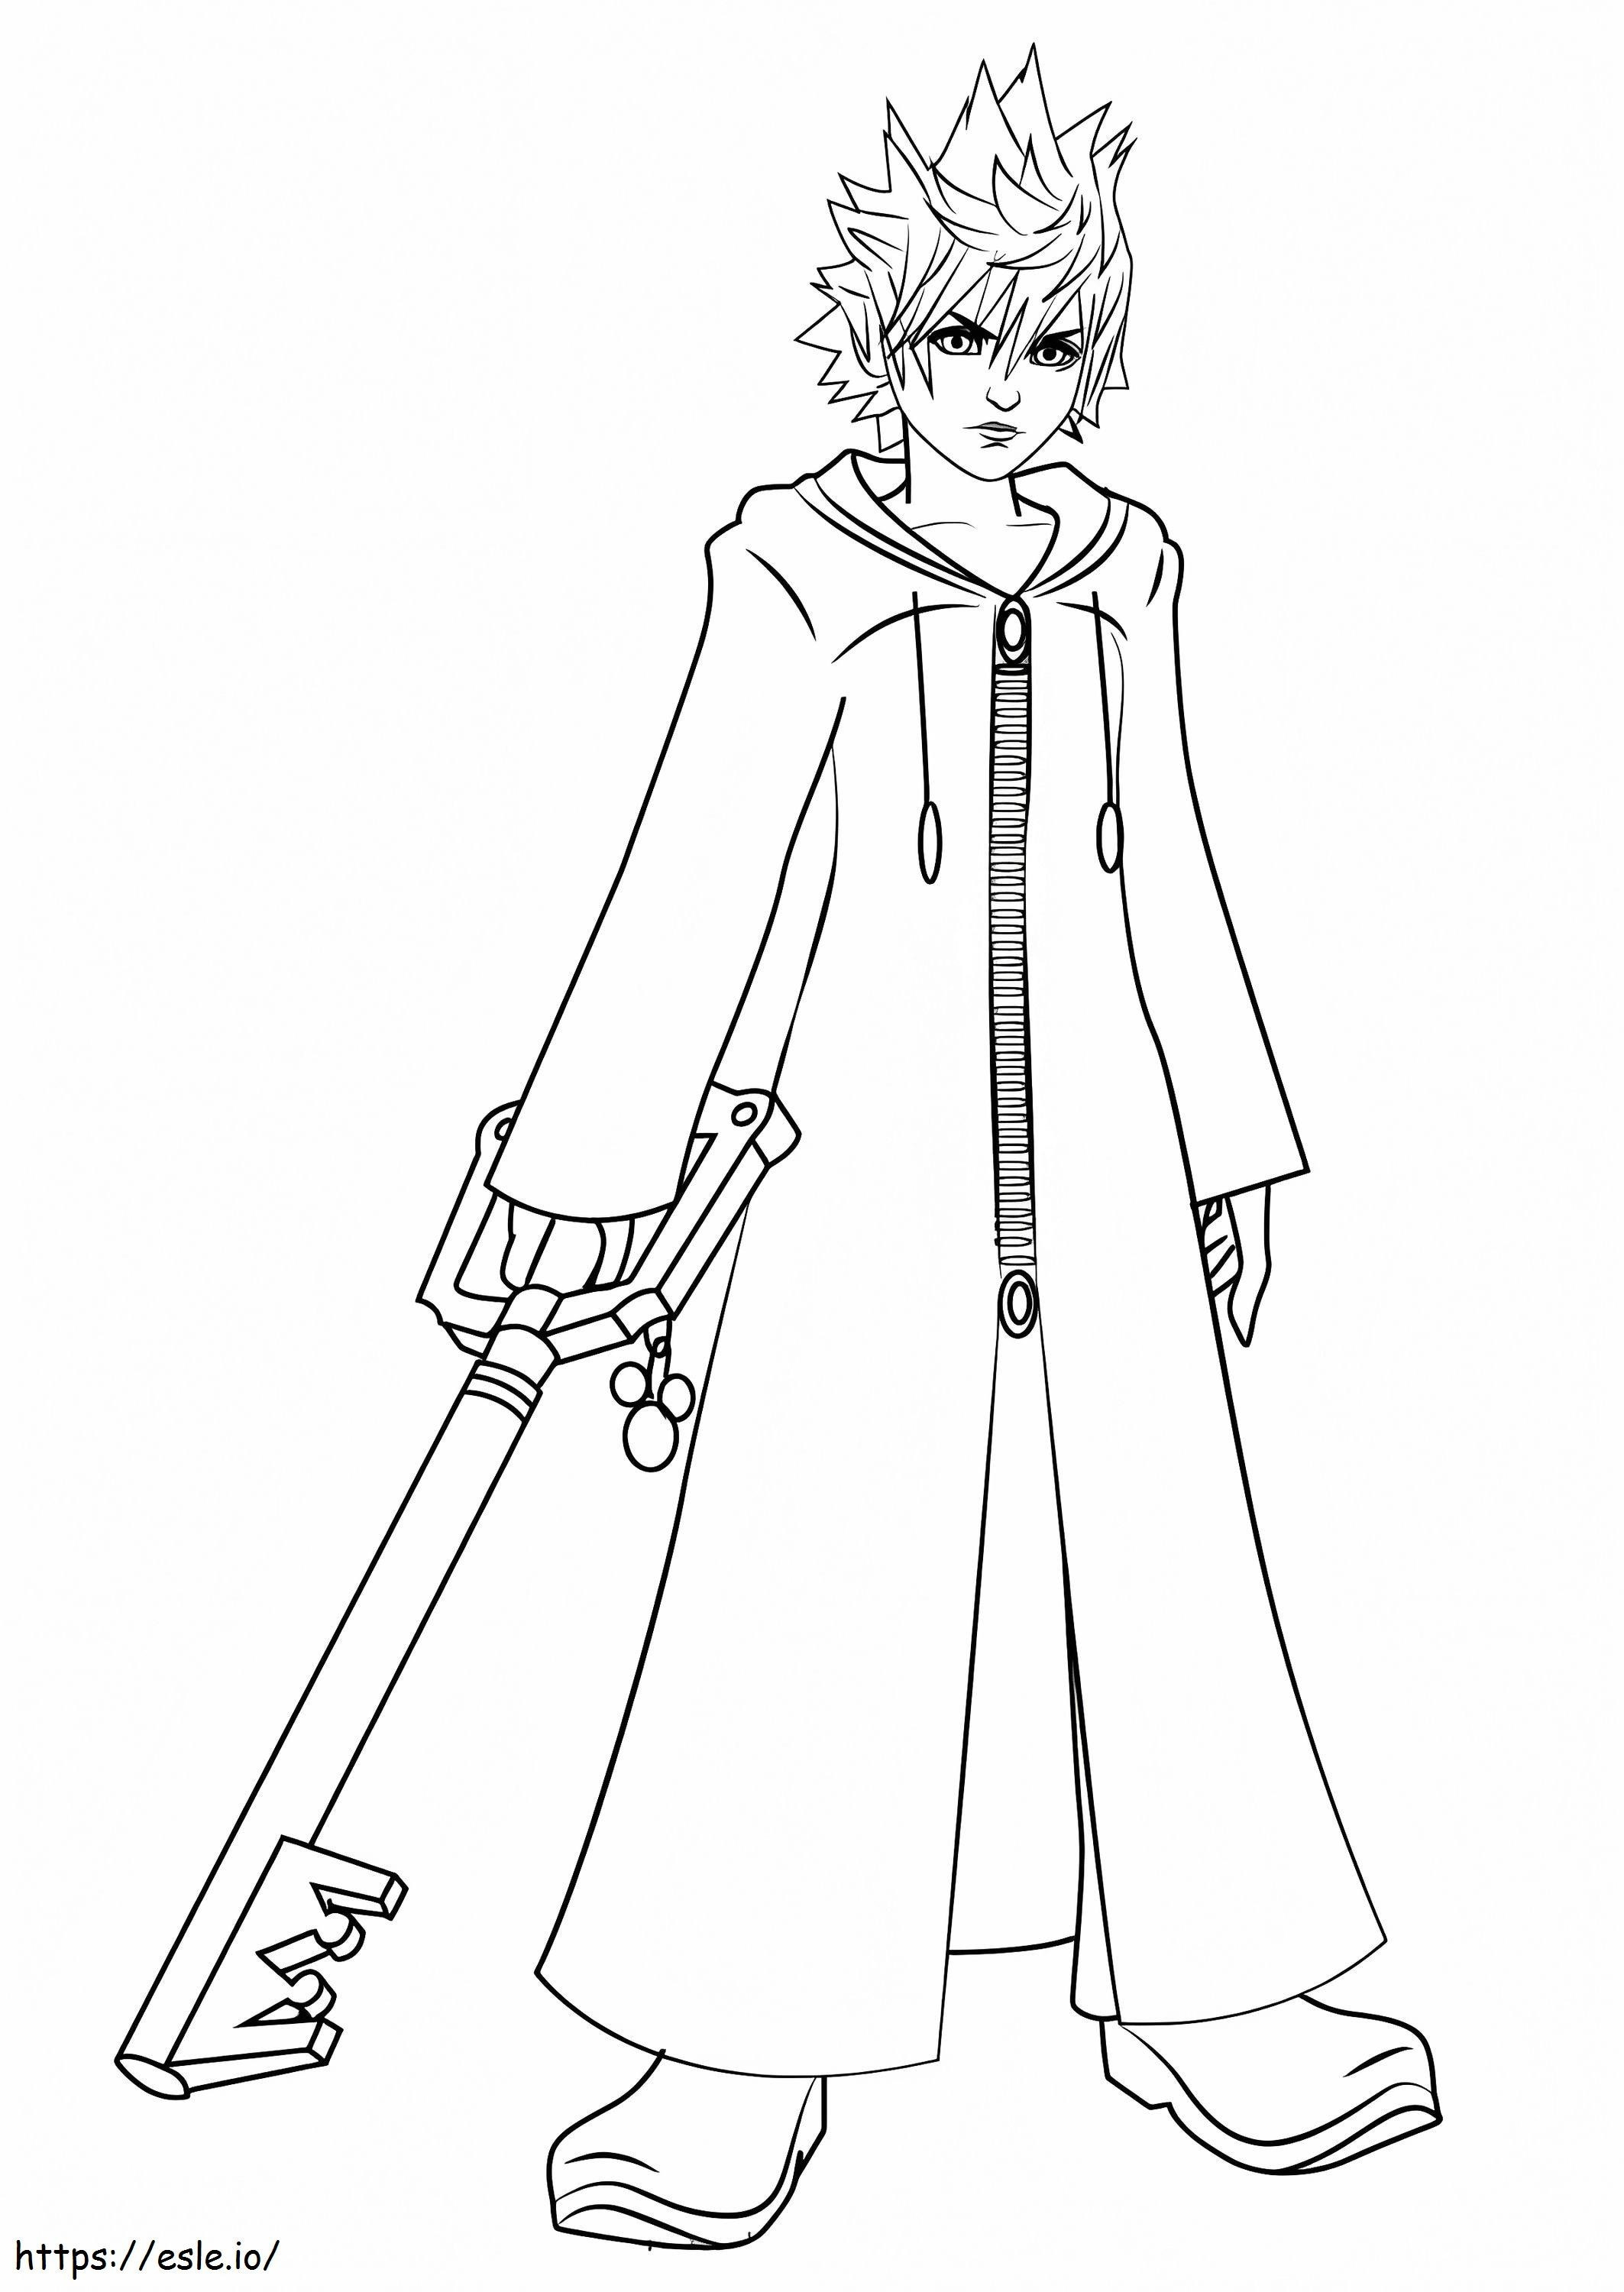 Roxas From Kingdom Hearts coloring page